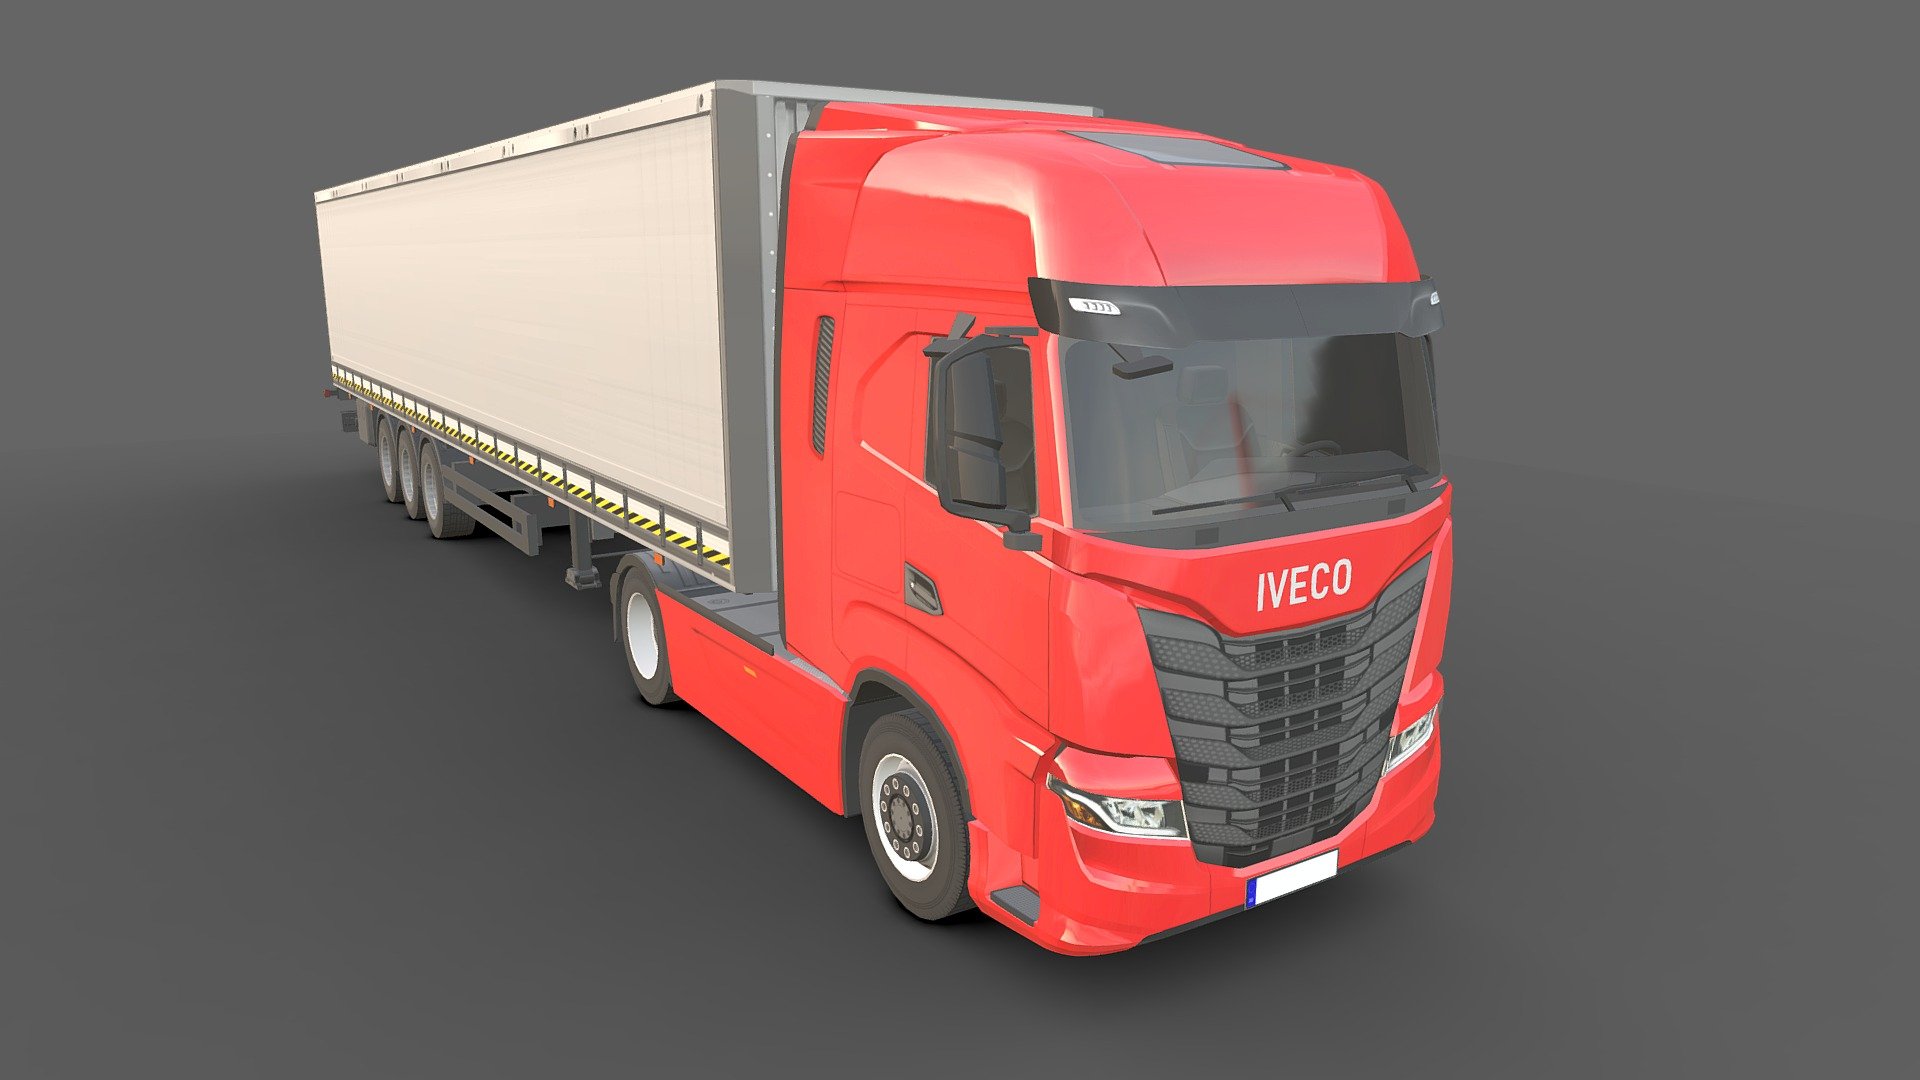 Tracteur Iveco S-Way 2021

Low-poly

Average poly count : 38,000

Average number of vertices : 33,000

Textures : 4096 / 2048

Formats .( FBX , OBJ , 3D MAX ).

High quality texture.

Isolated parts (Door, steering wheel, wheels, body).

Its dashboard is simple.

You can use this model in all games 3d model